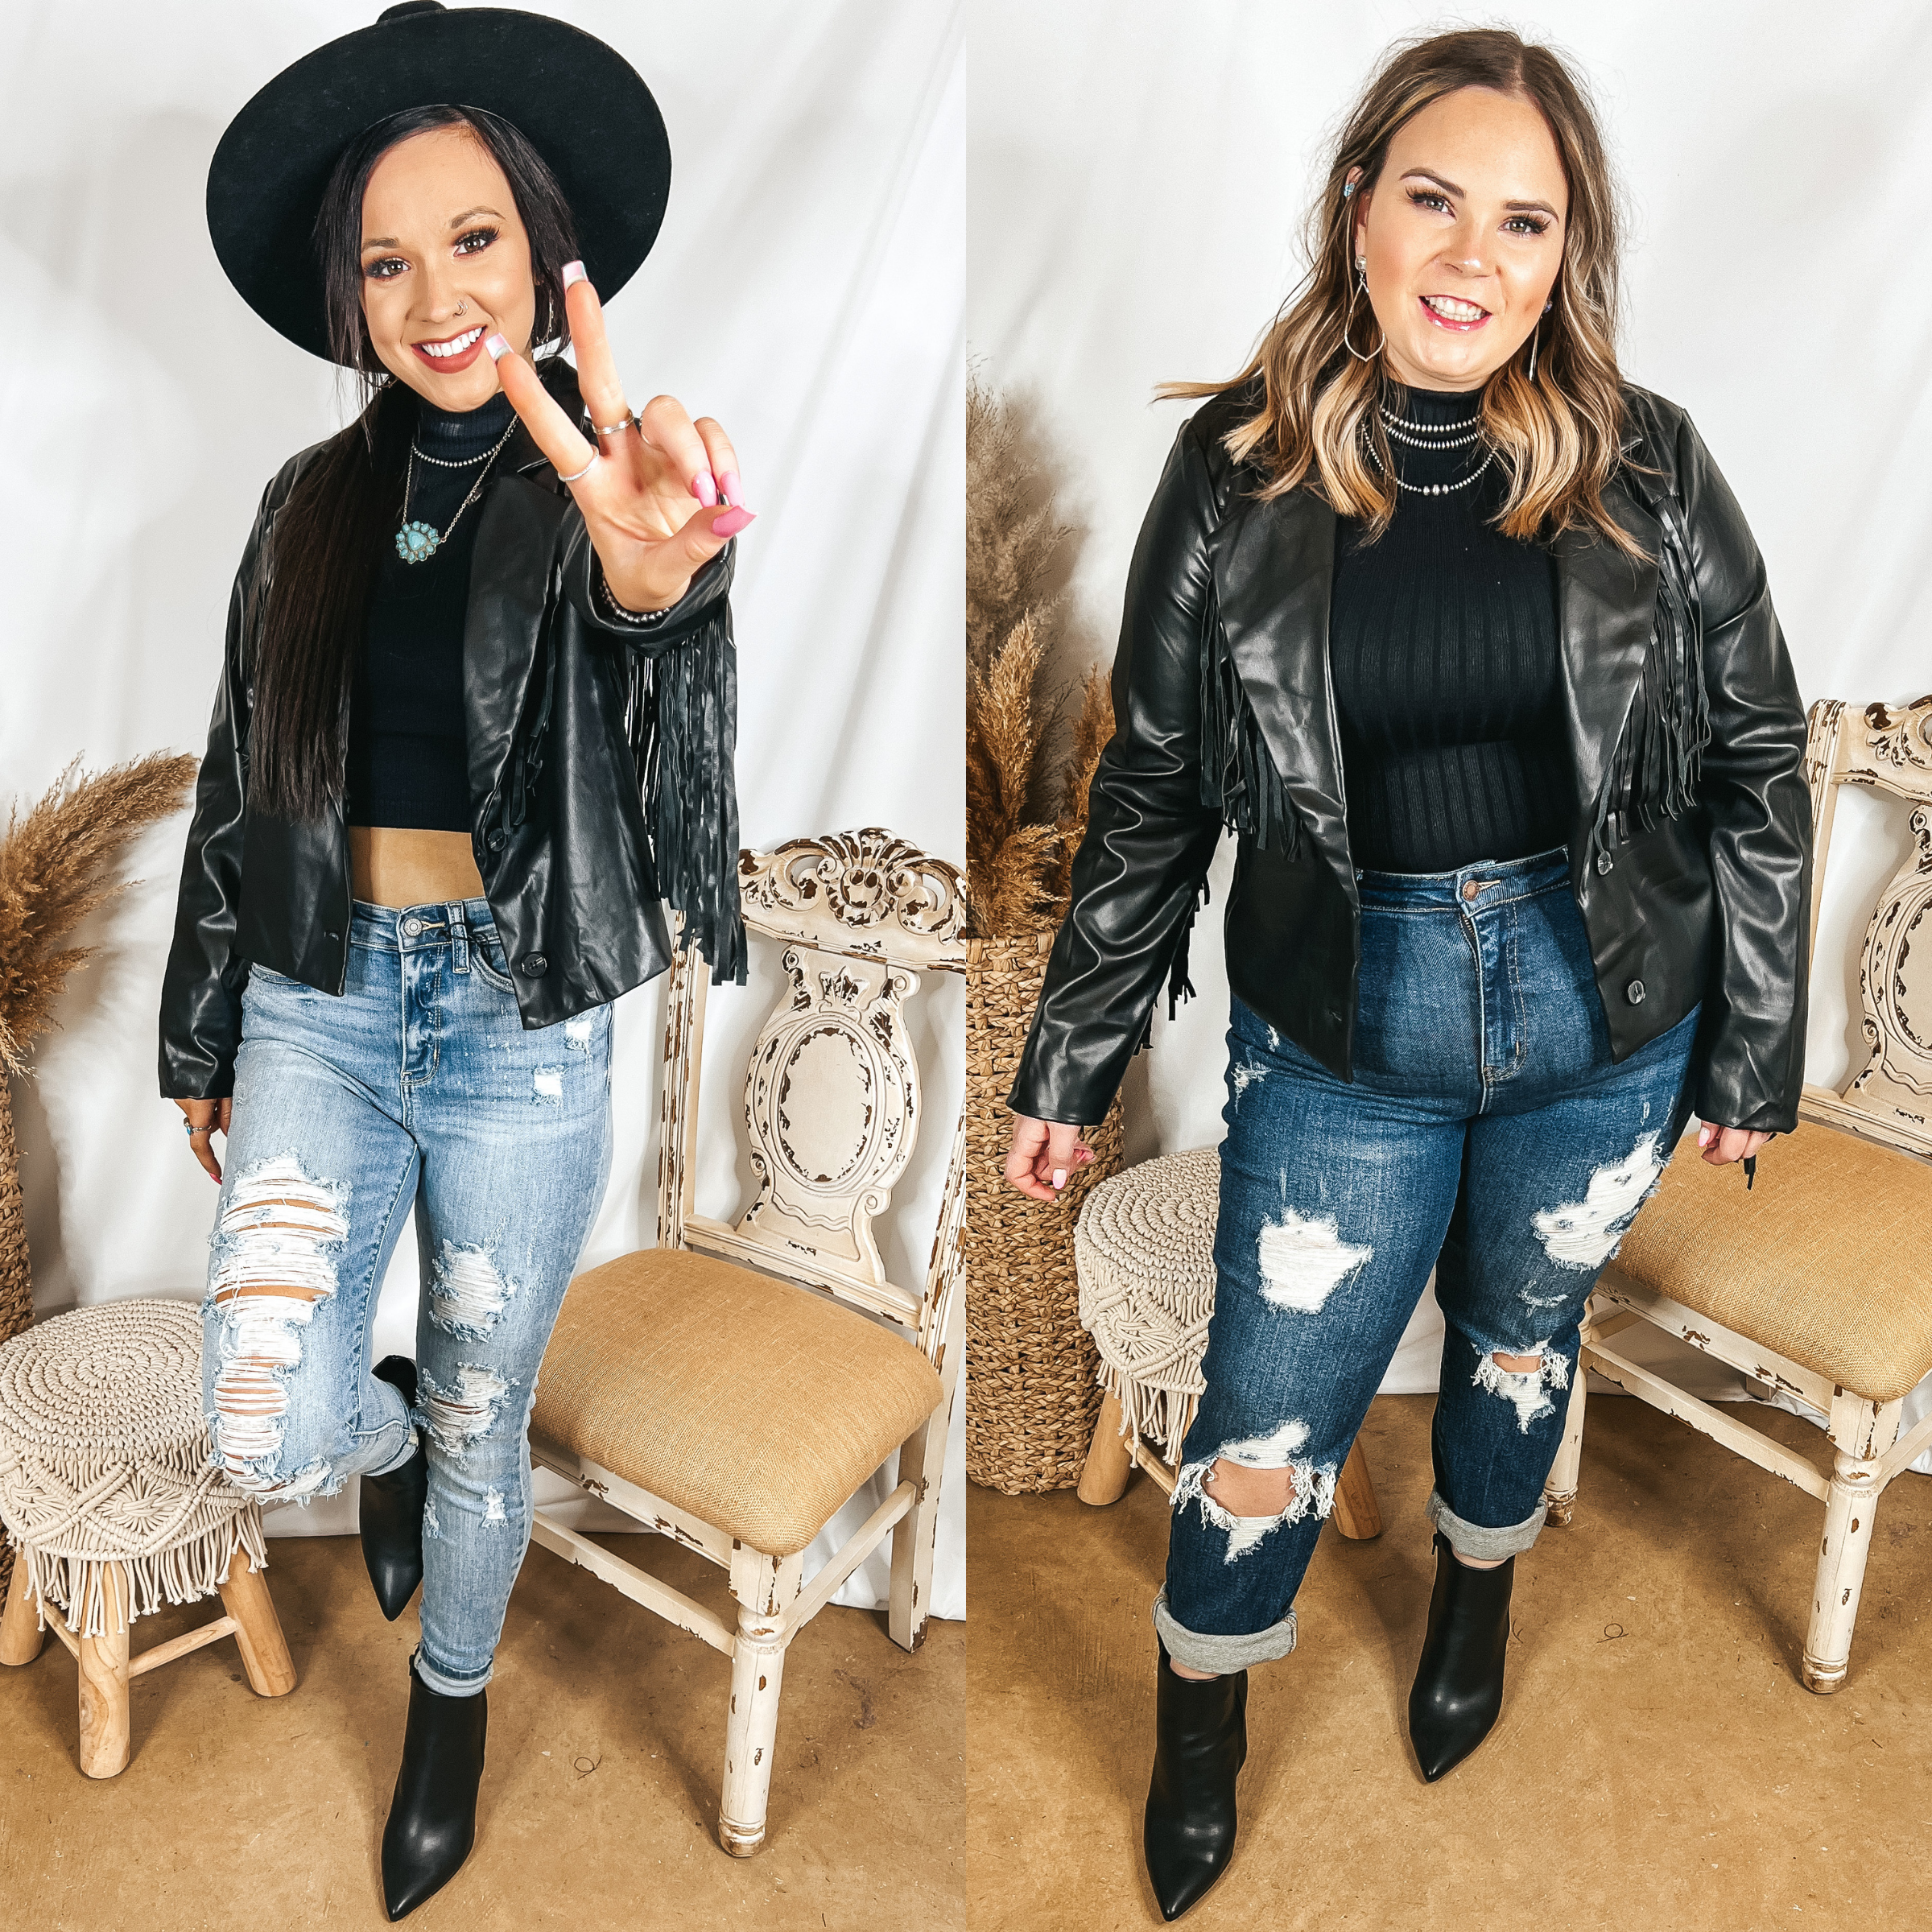 Models are wearing a black leather jacket that has fringe. Size small model has it paired with light wash distressed jeans, black booties, and a black hat. Size large model has it paired with dark wash distressed jeans, black booties, and silver jewelry.